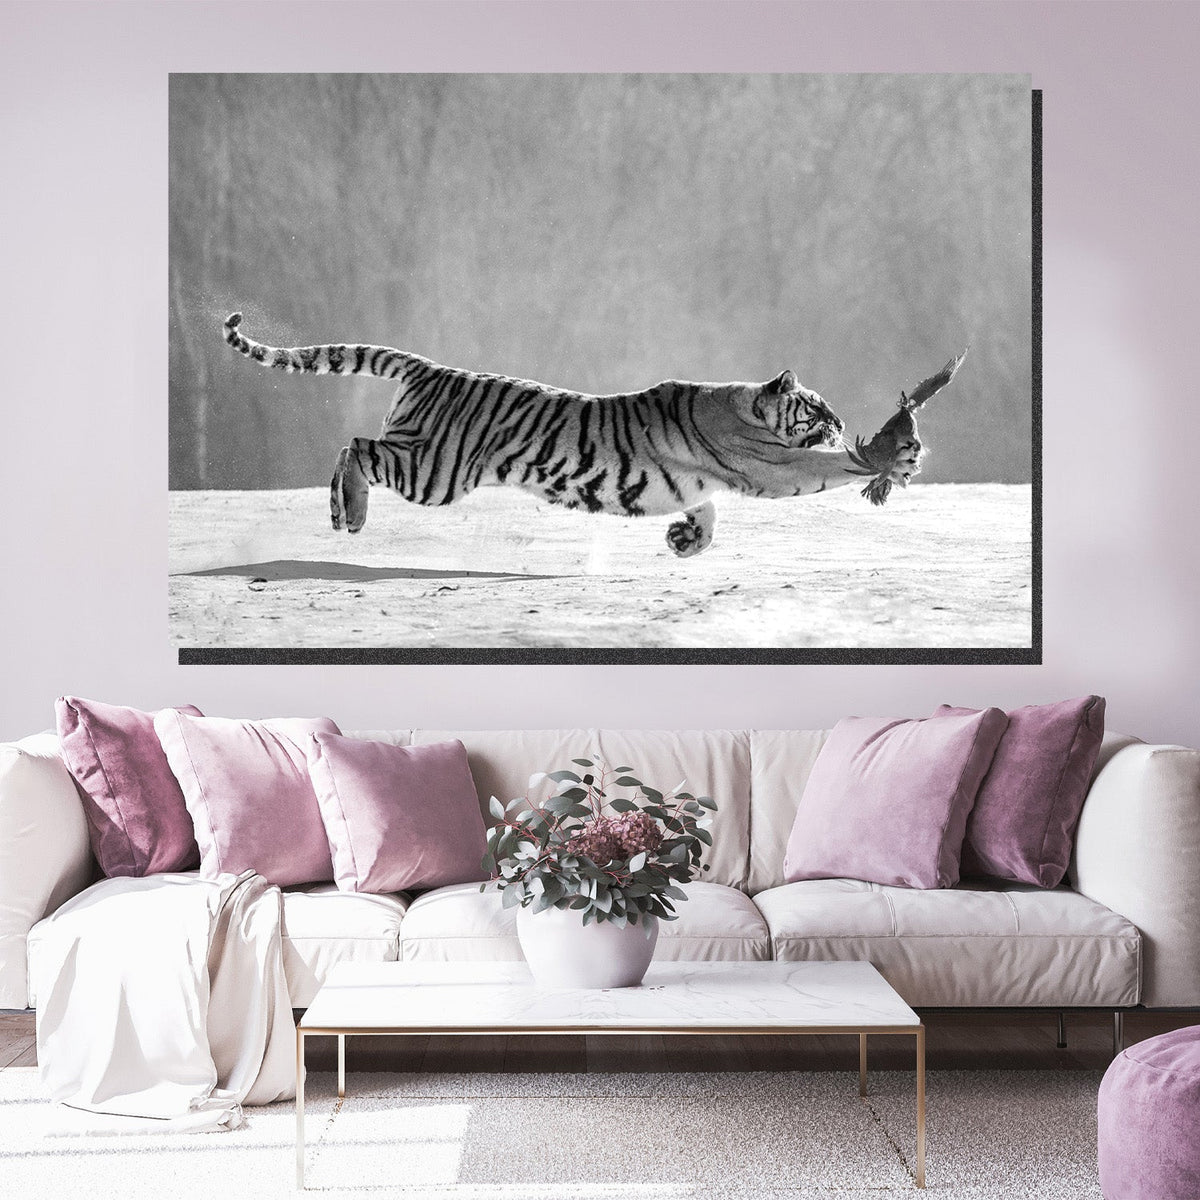 https://cdn.shopify.com/s/files/1/0387/9986/8044/products/SiberianTigerCanvasArtprintStretched-2.jpg